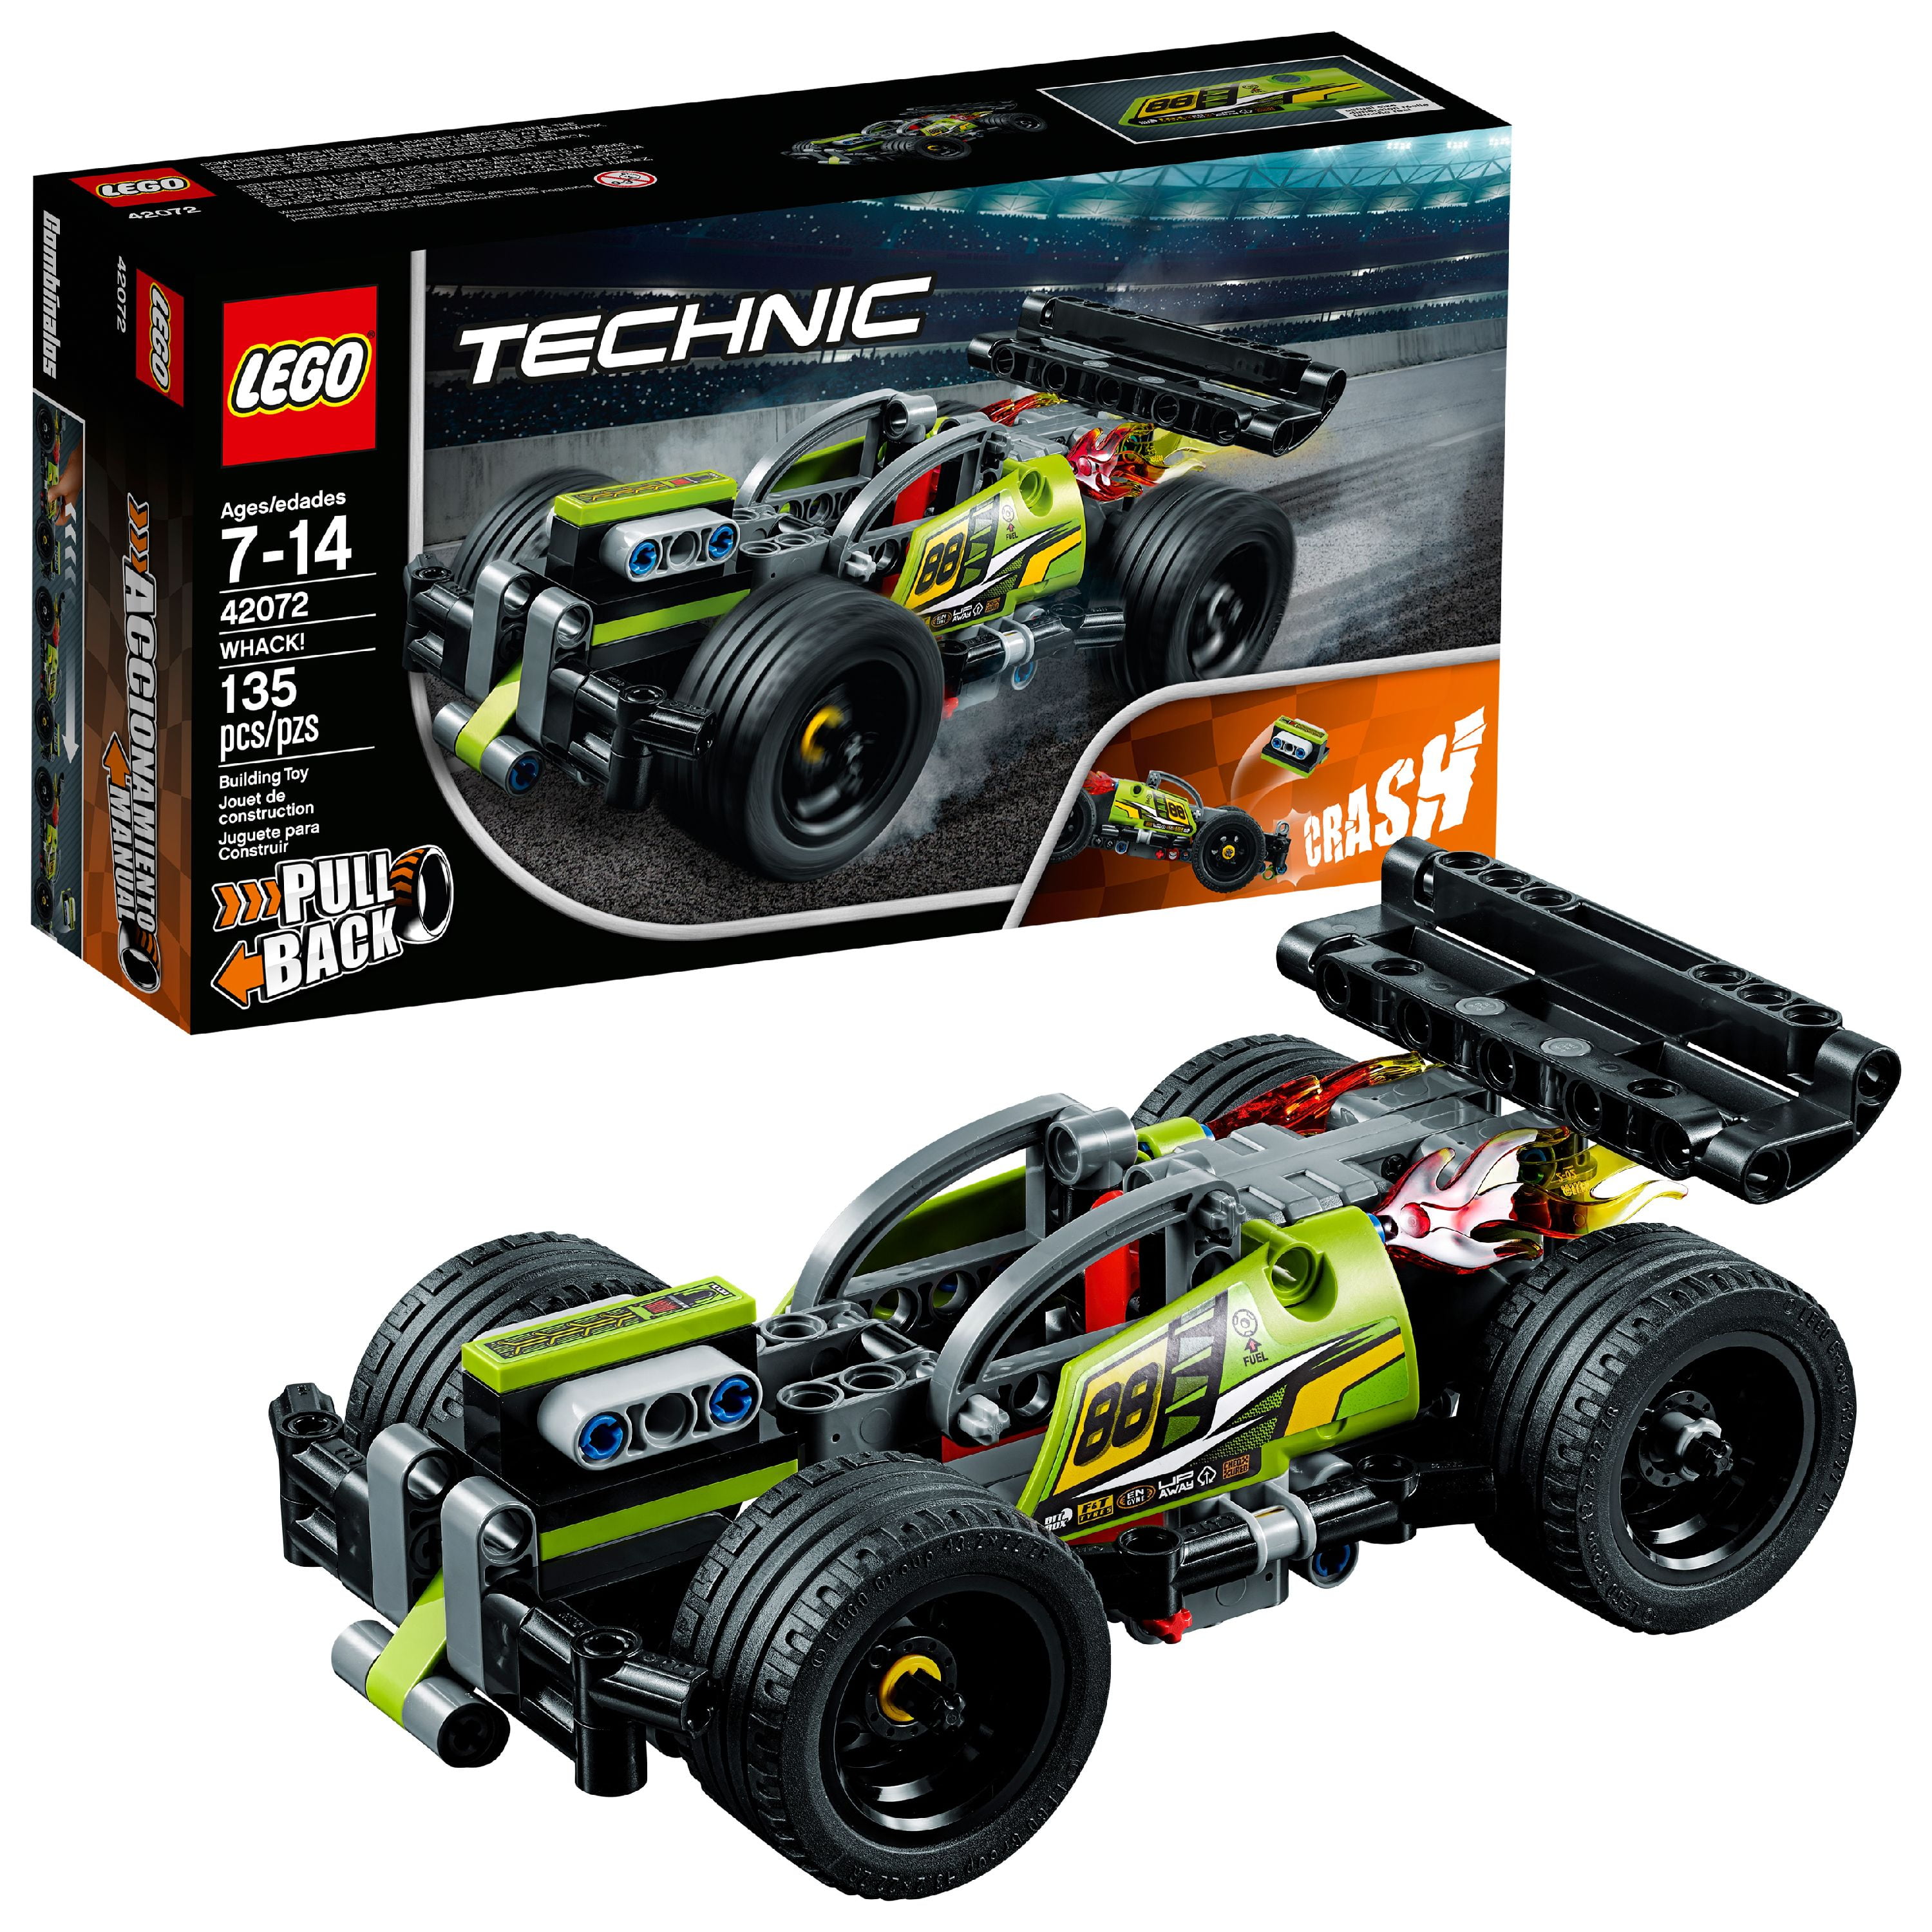 LEGO 42072 Technic WHACK Building Toy for sale online 